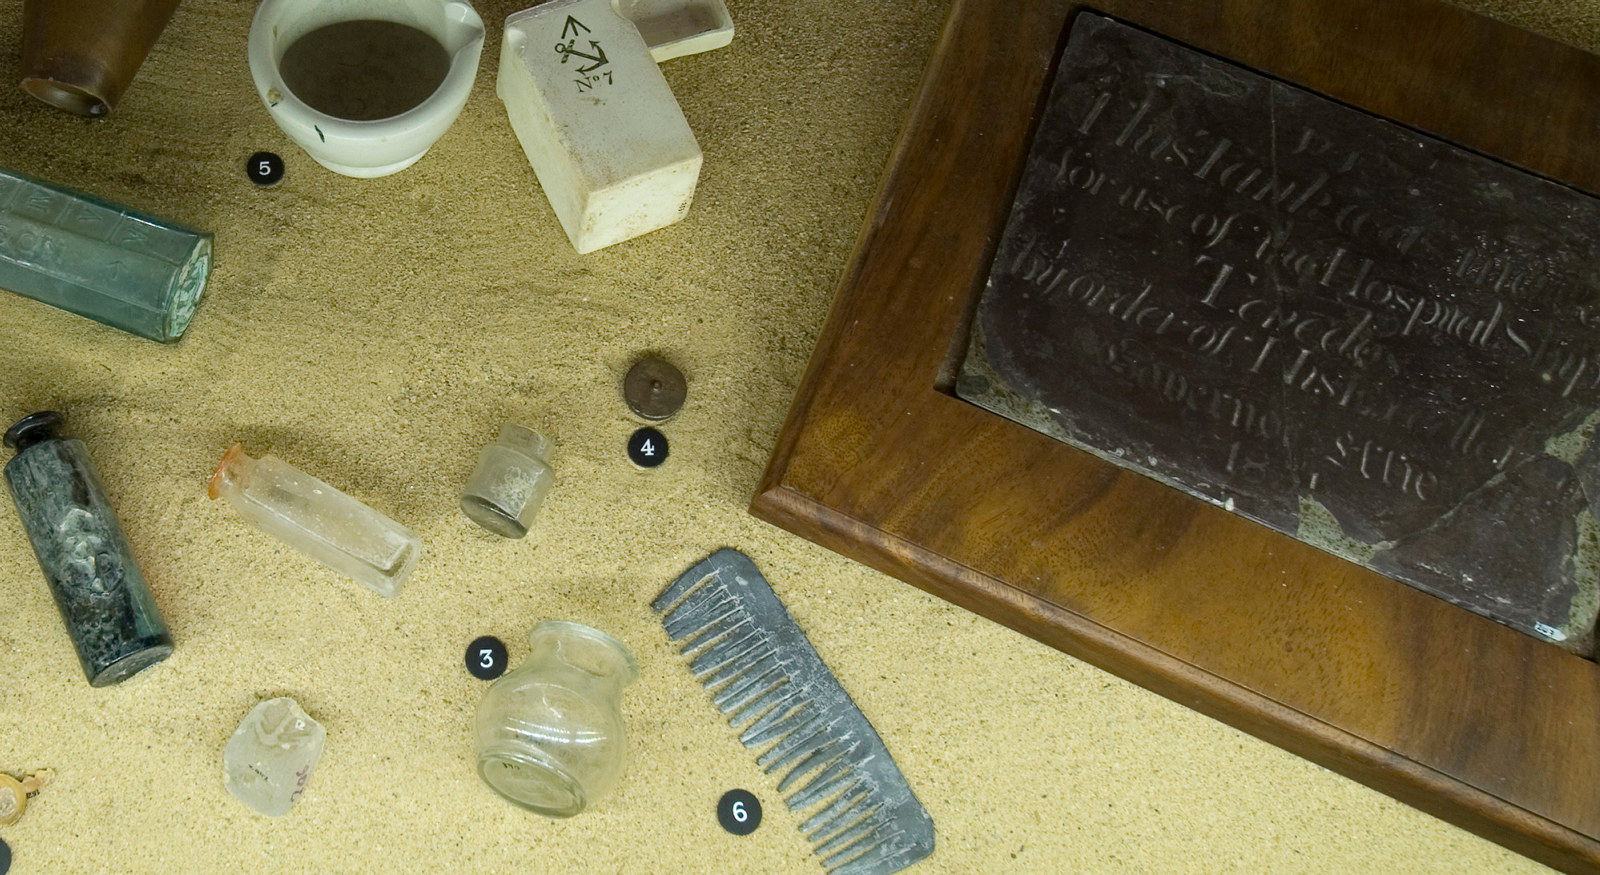 View of exhibition installation with ceramic and glass artefacts and plaque